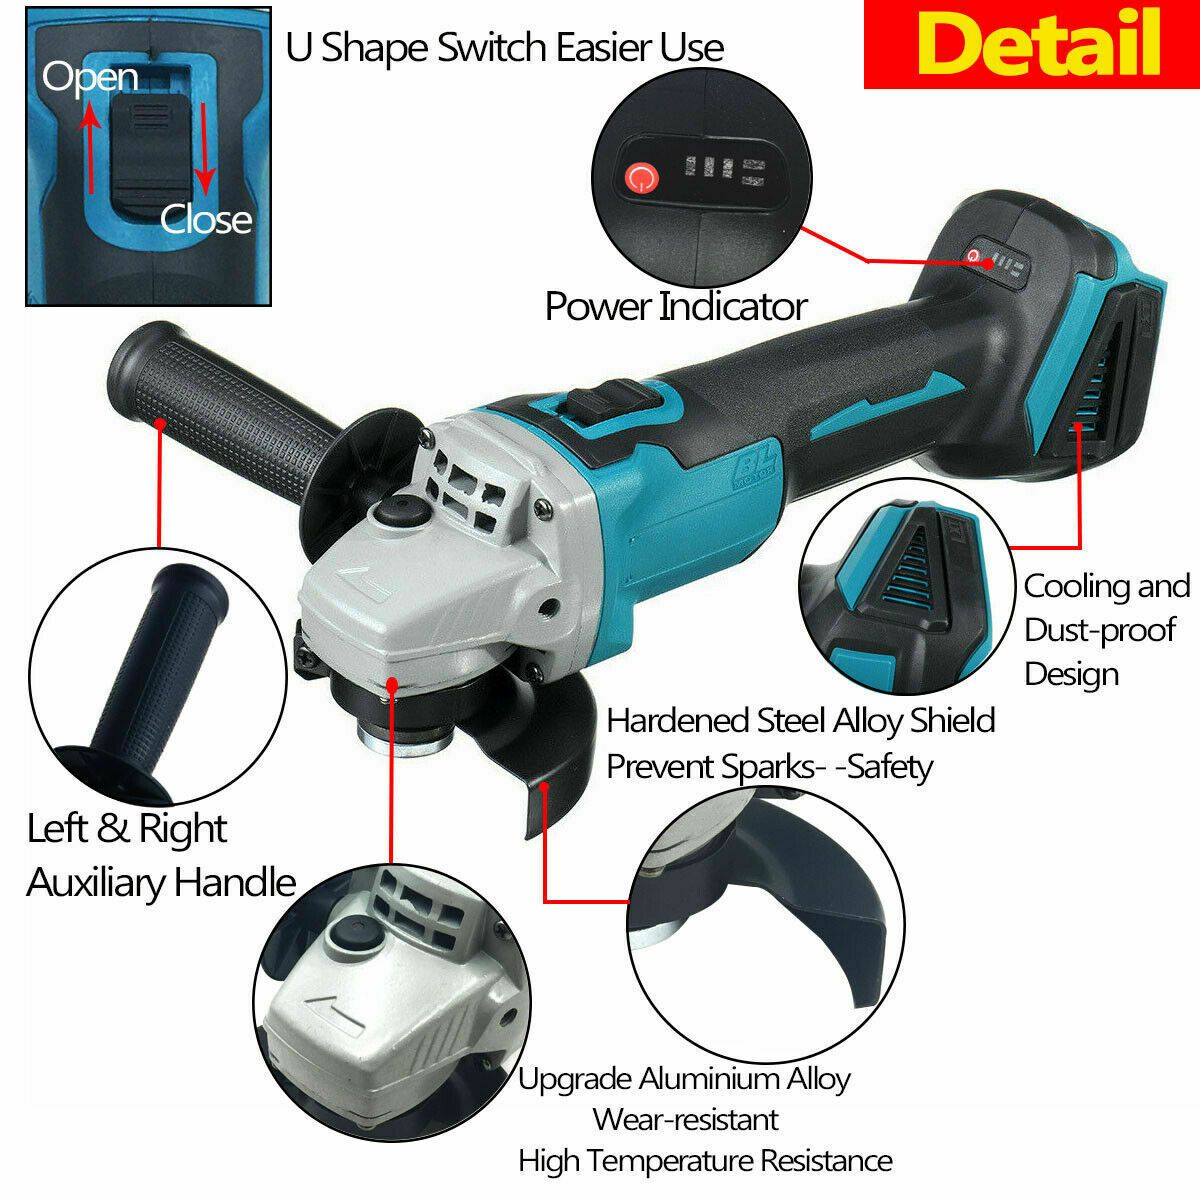 21V-Cordless-Brushless-Lithium-Ion-Angle-Grinder-Grinding-Power-Tool-Cutting-1707731